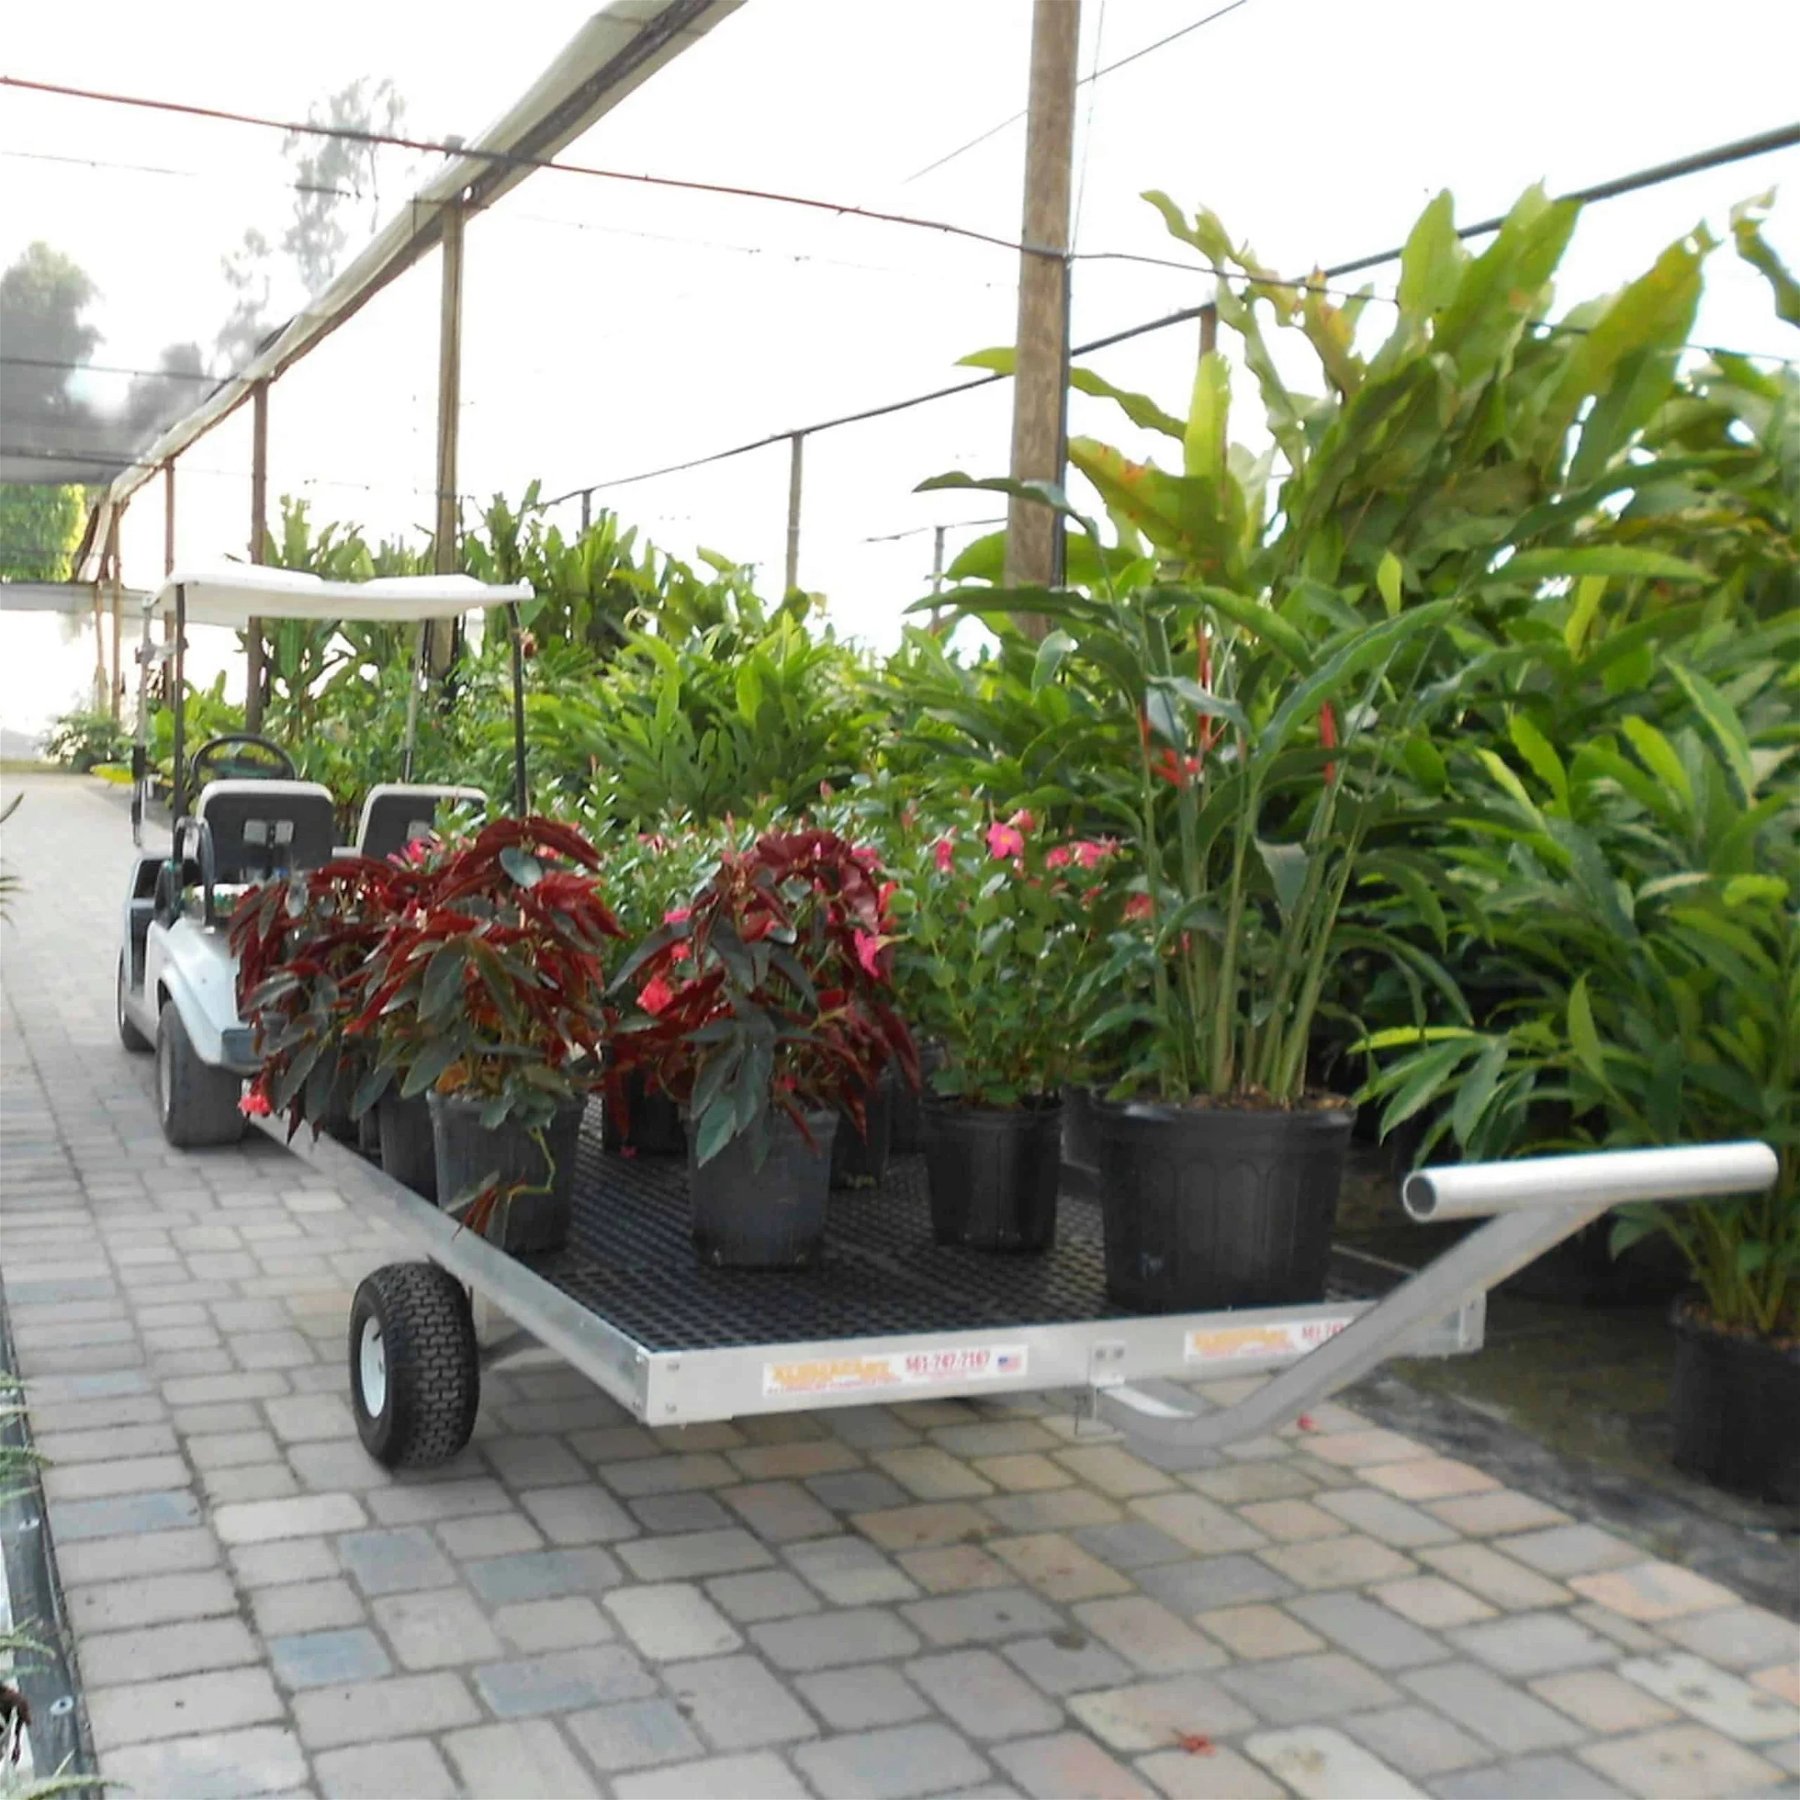 A SEMI-TRACKING TRAILER loaded with potted plants, attached to a golf cart in a garden nursery center.